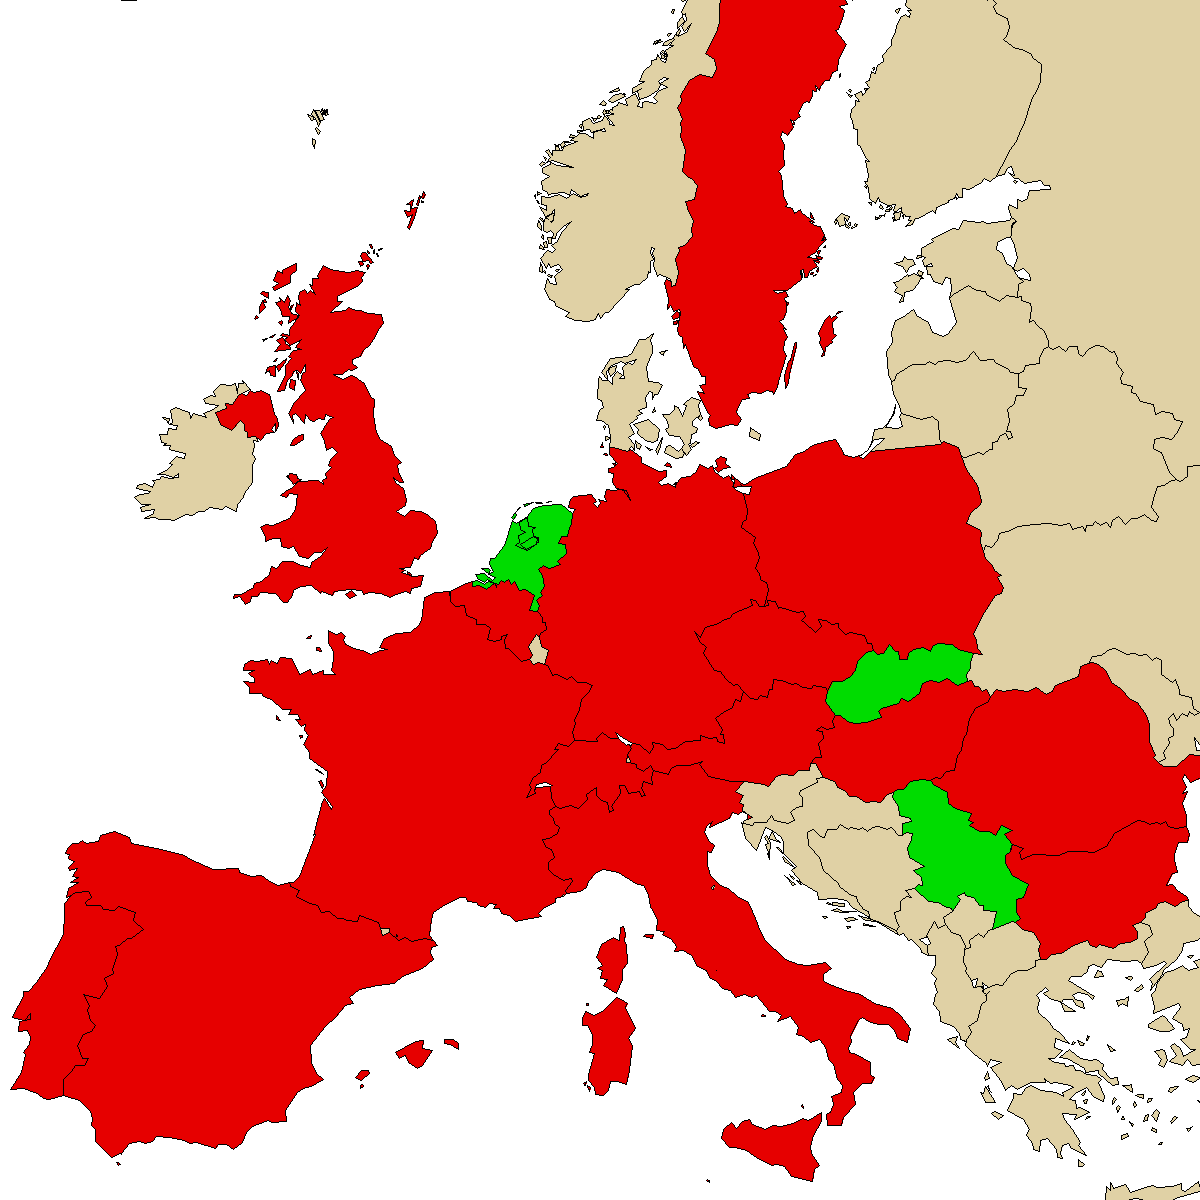 legal info map for our product NEP, green are countries where we found no ban, red with ban, grey is unknown